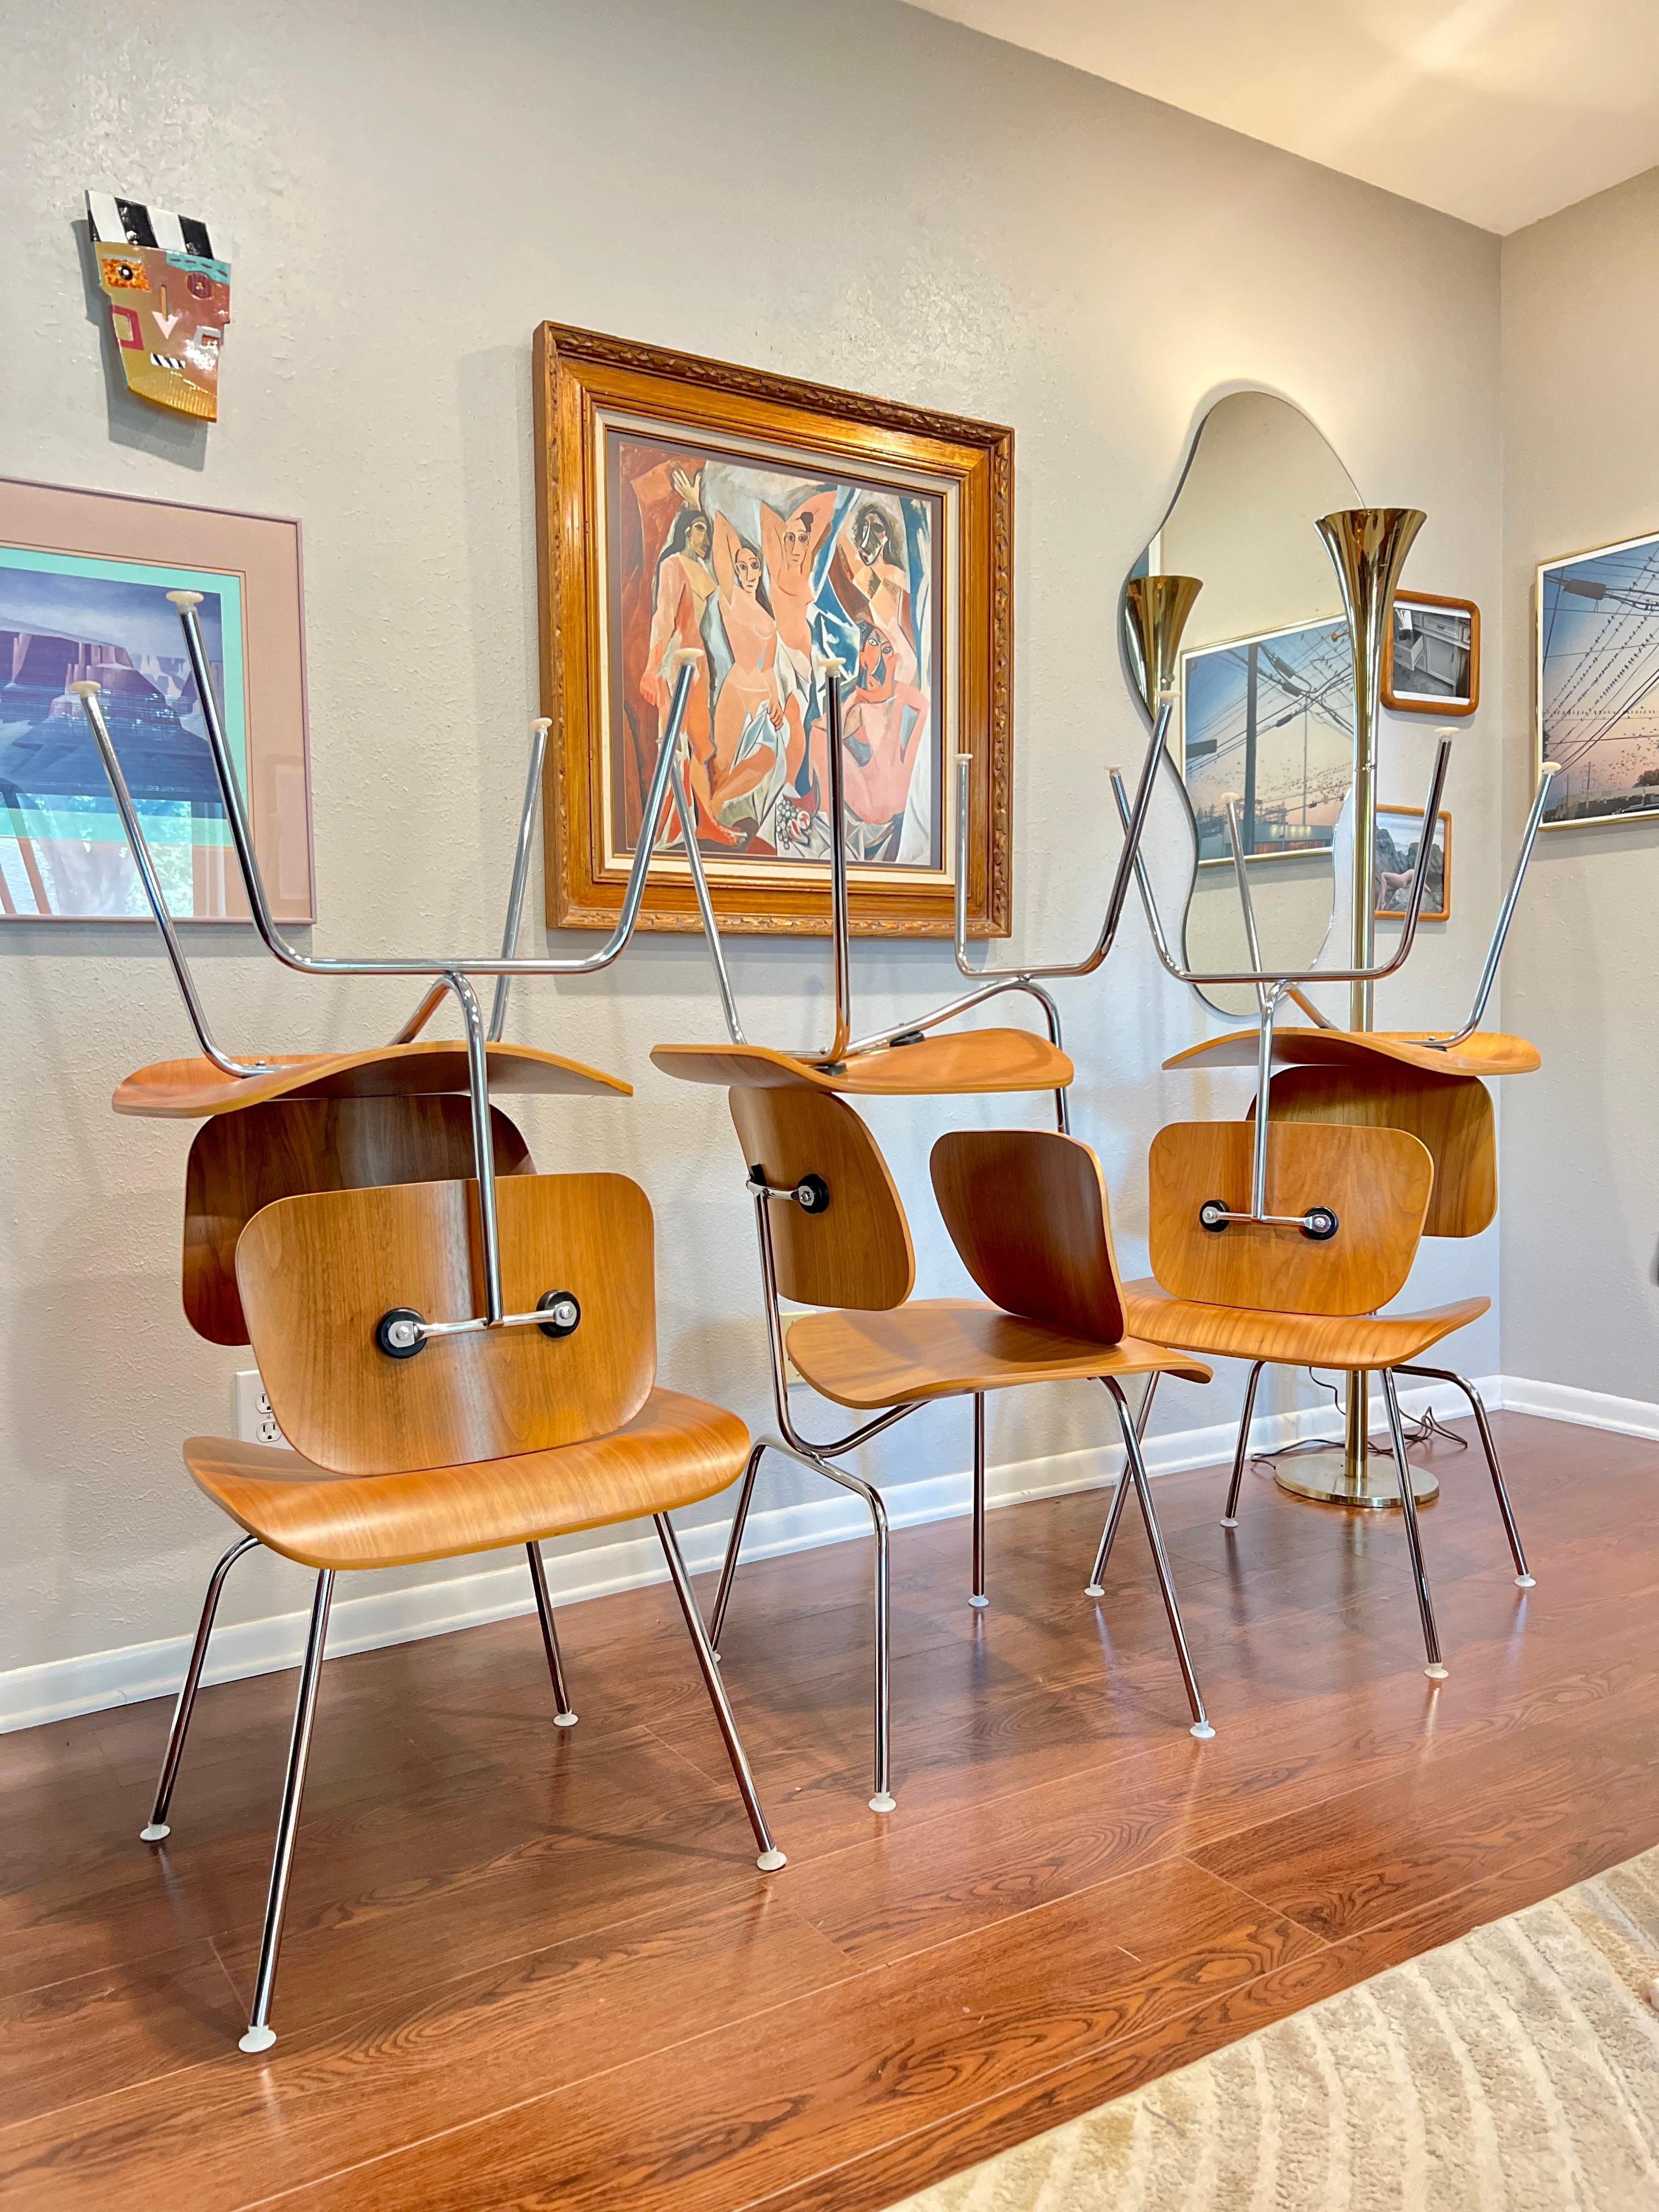 A set of 6 Herman Miller DCM chairs circa 2008. Recently refurbished and in pristine condition. “The Eames Molded Plywood Dining Chair began as an experiment in the California apartment of Charles and Ray Eames and quickly became a favorite of